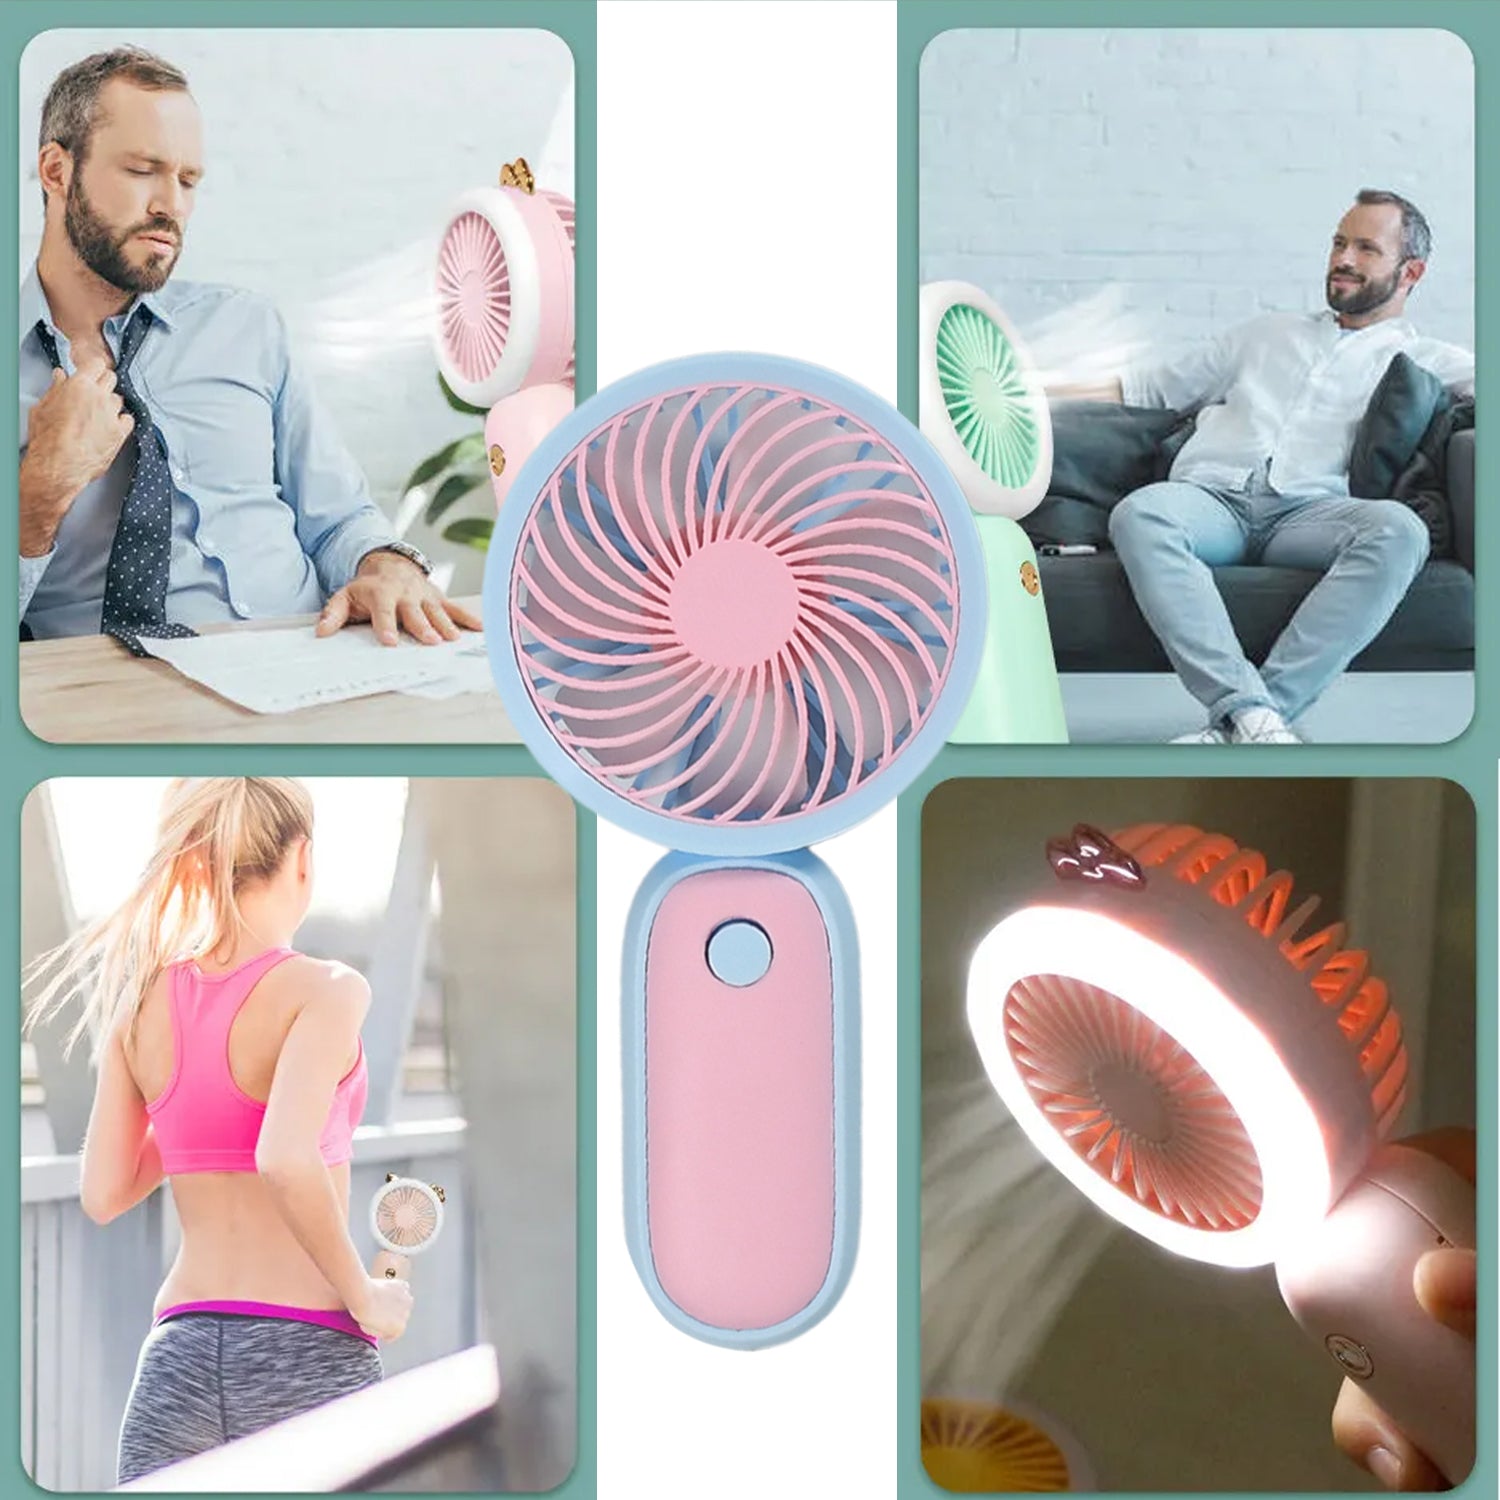 4800 Mini Handheld Fan Portable Rechargeable Mini Fan Easy to Carry, for Home, Office, Travel and Outdoor Use DeoDap